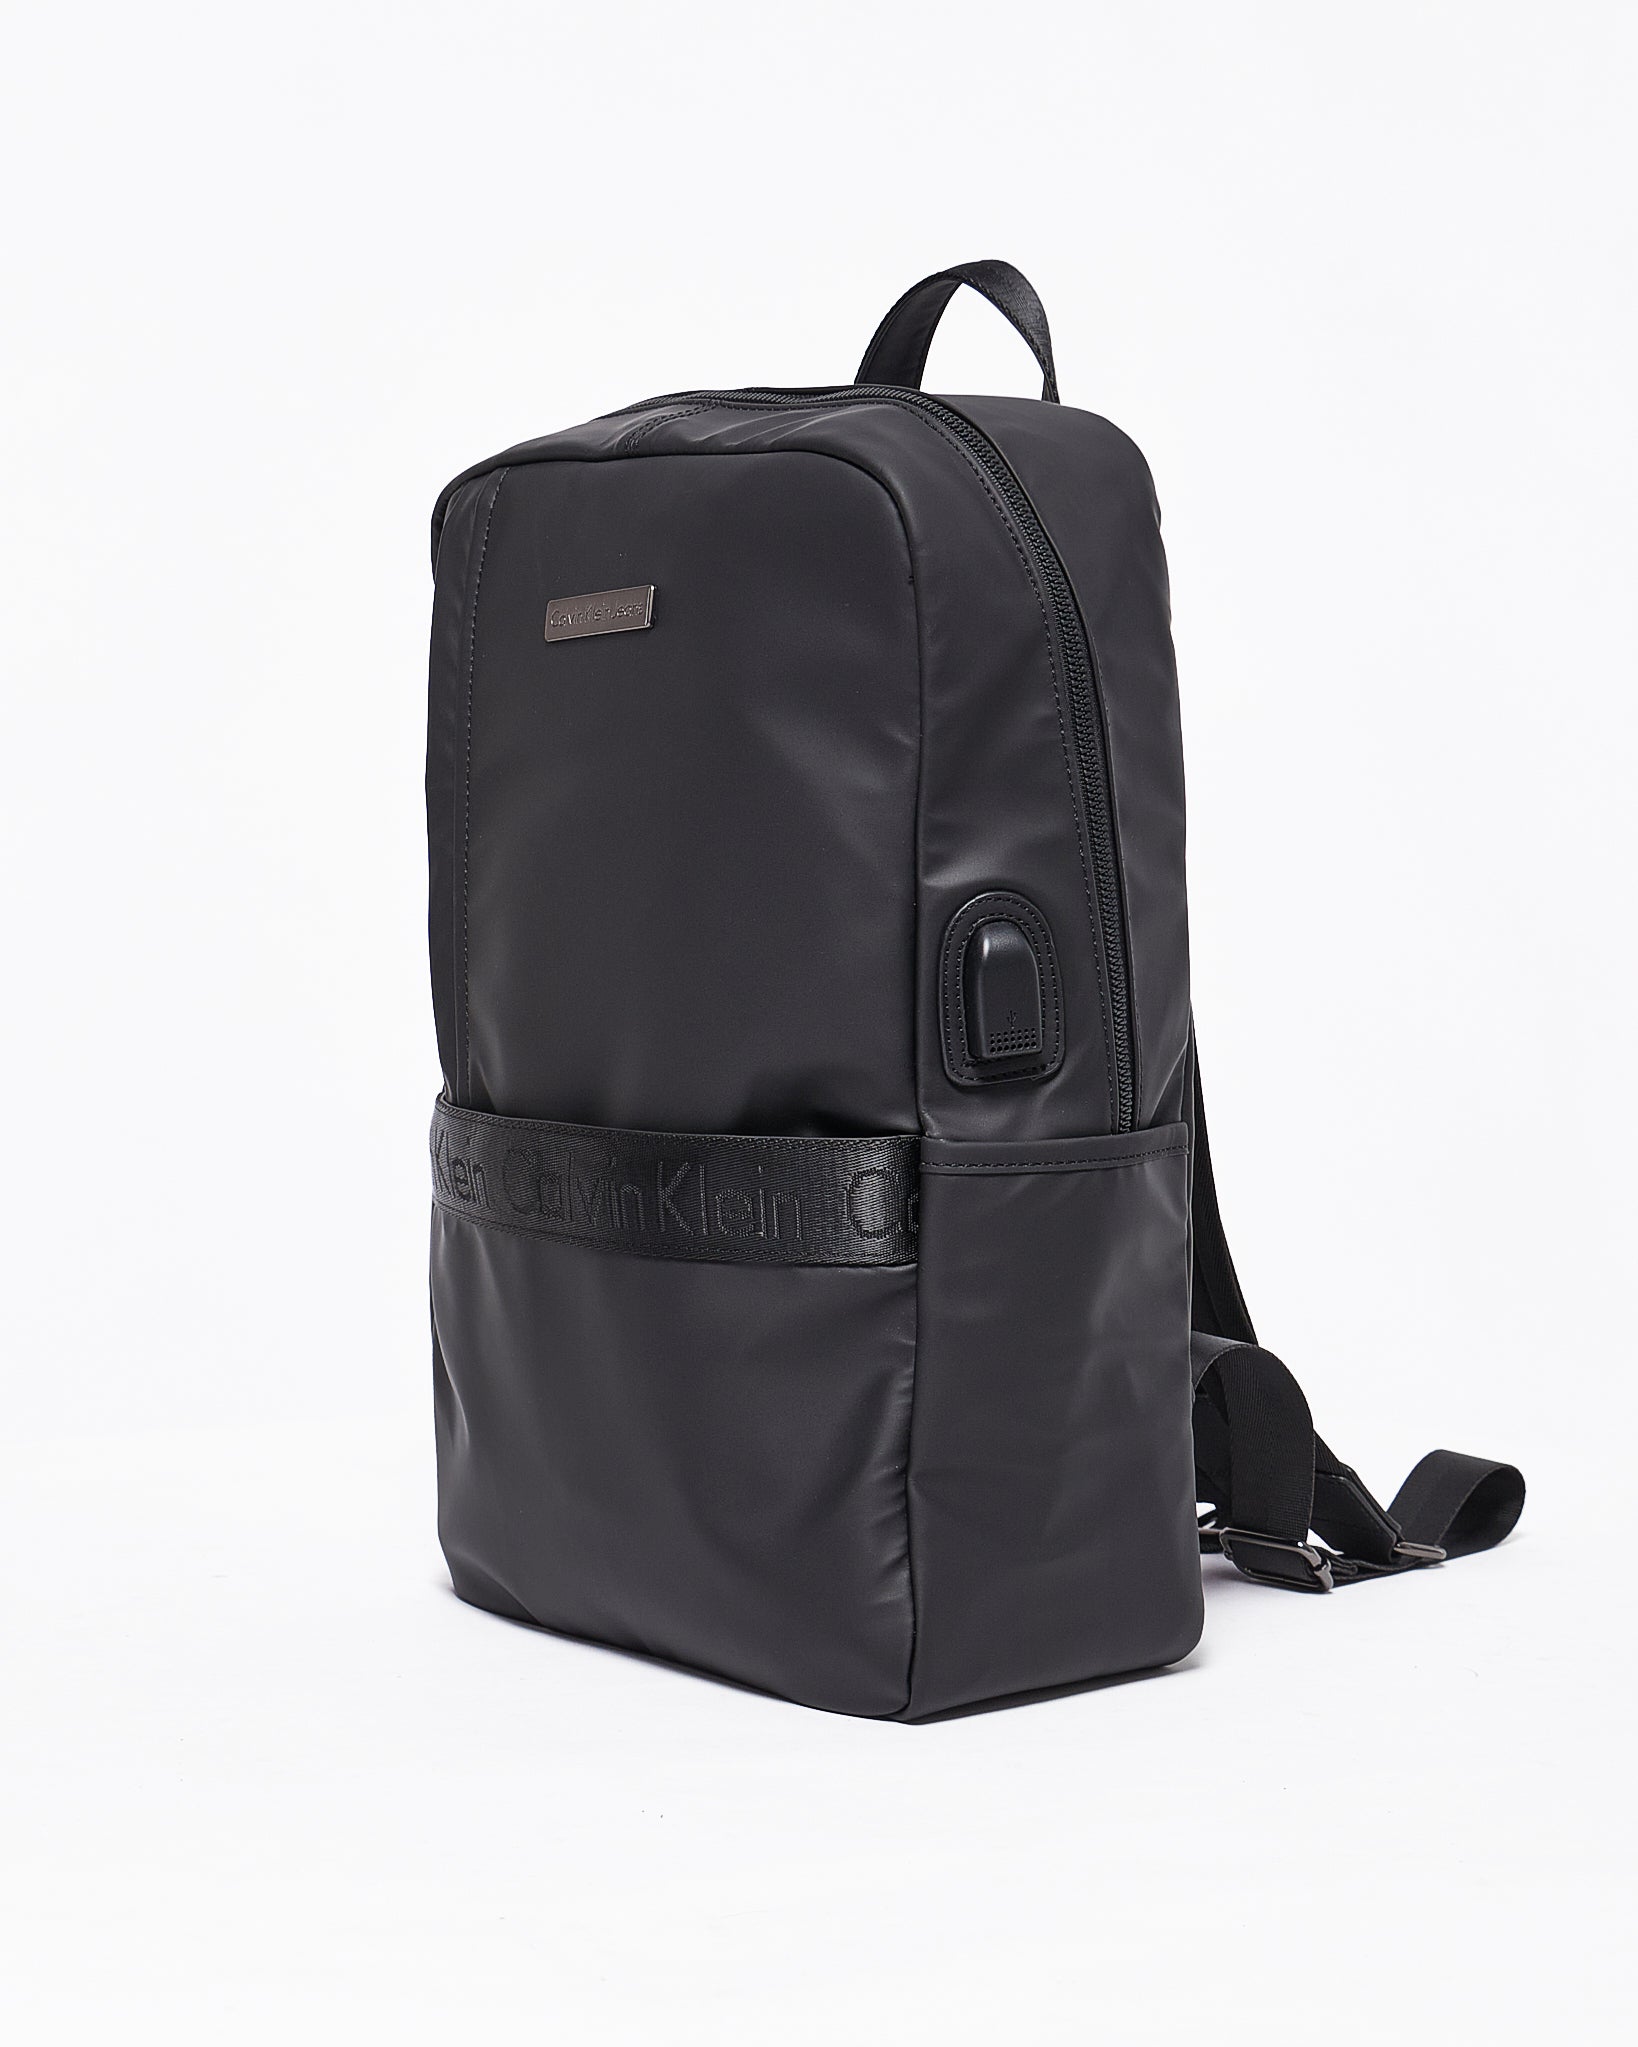 MOI OUTFIT-CK Men Backpack 37.90